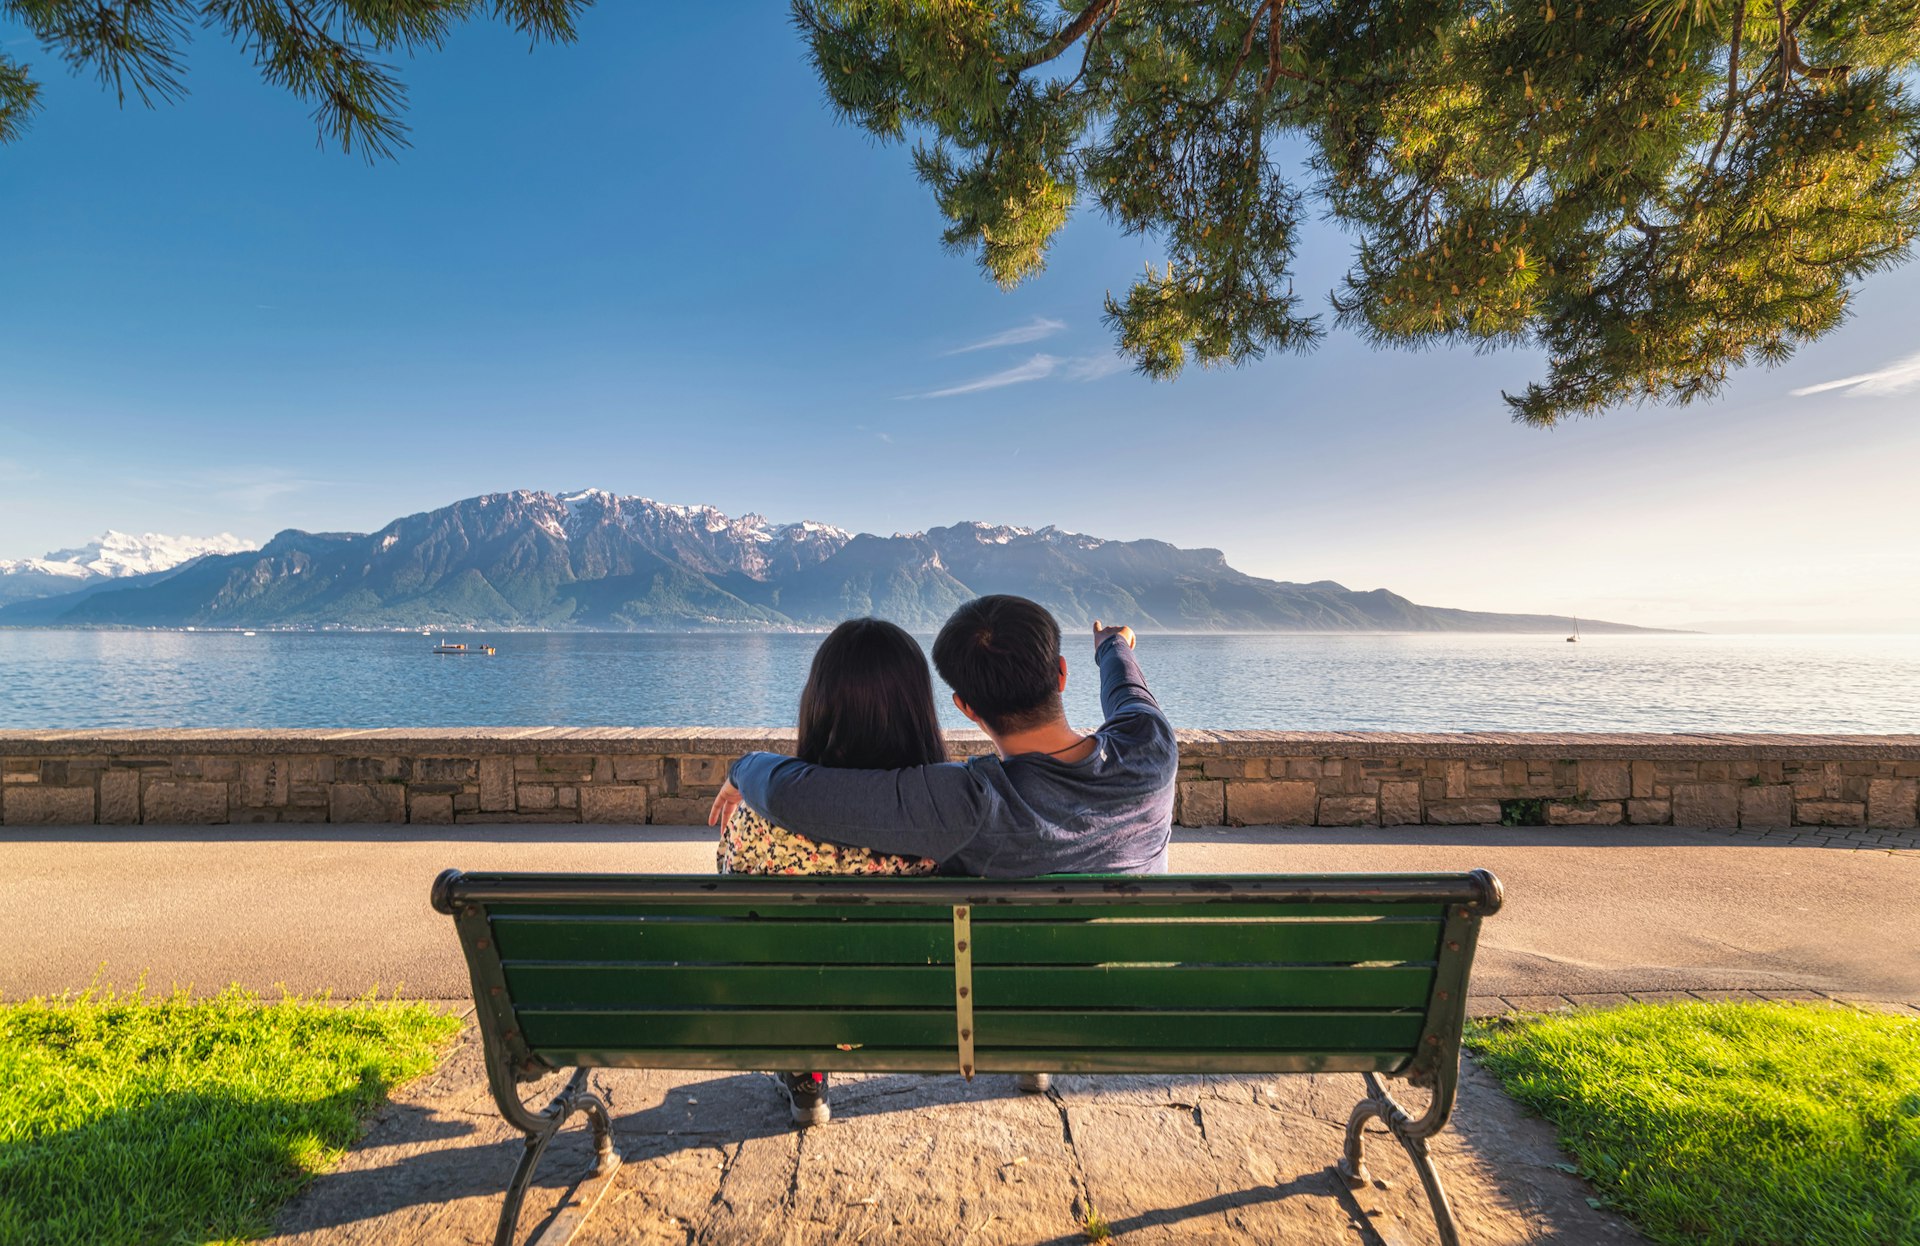 Portrait of Couple Love Tourist are Sitting in Public Garden Bench While Looking at Beautiful Scenic Nature Landscape at Lake Geneva, Vevey, Switzerland.